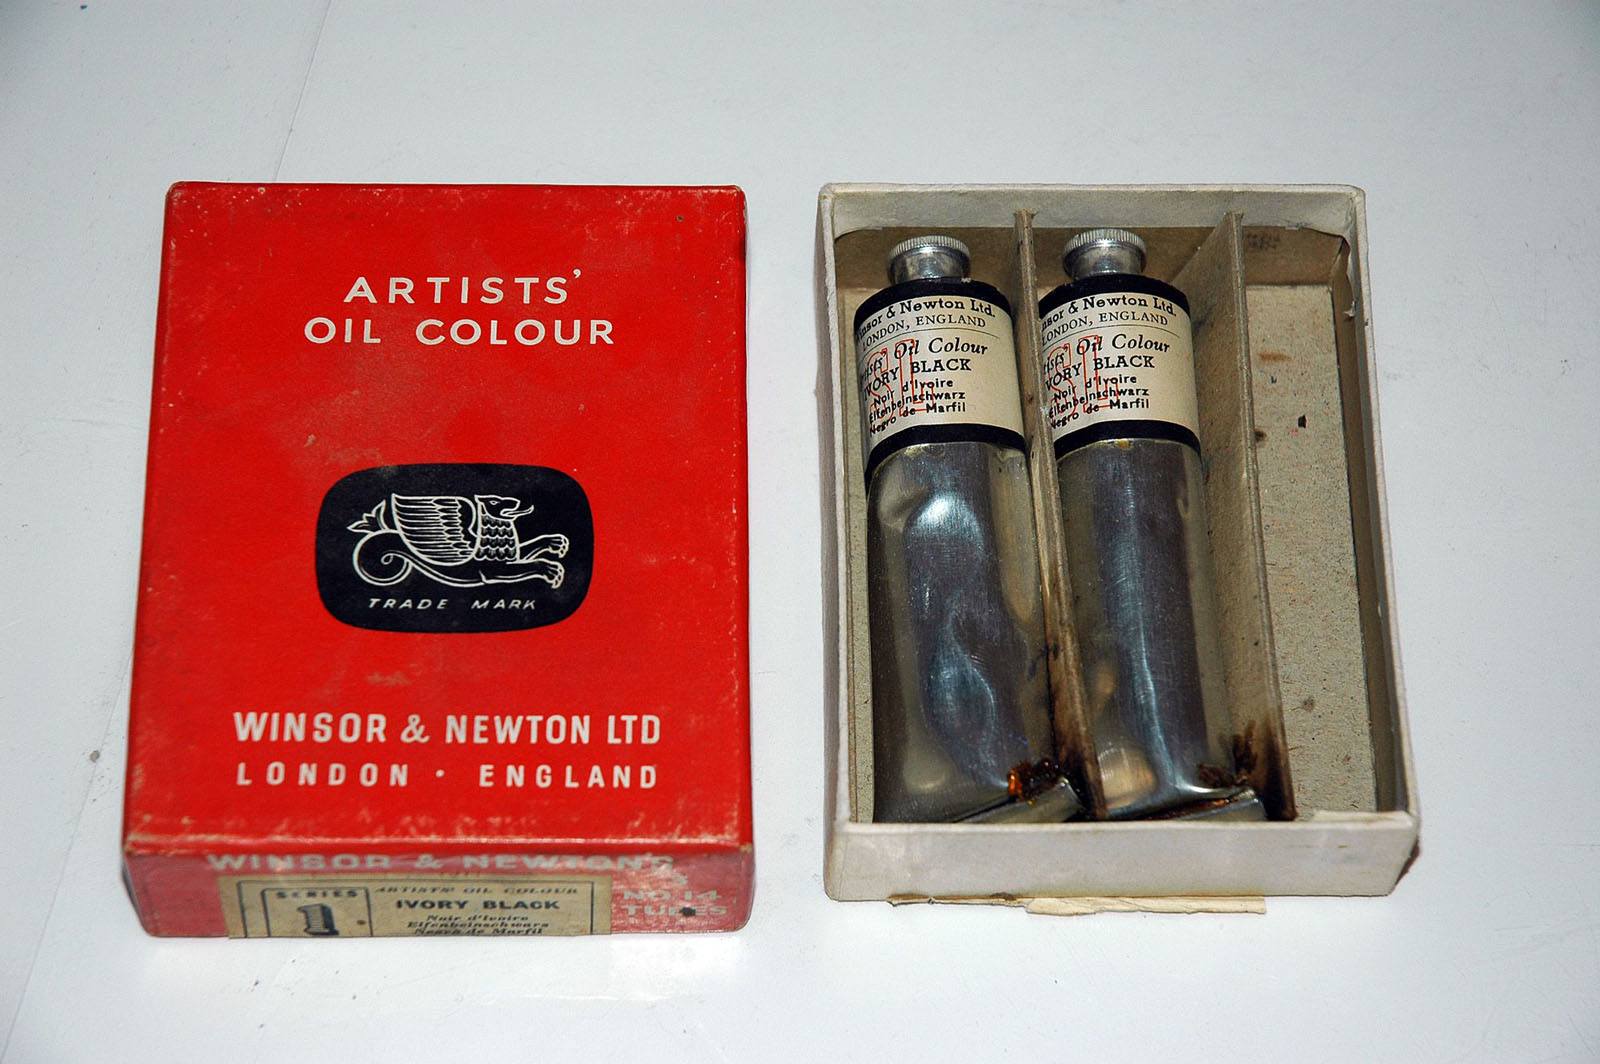 A box of two Winsor & Newton Black Oil Paints